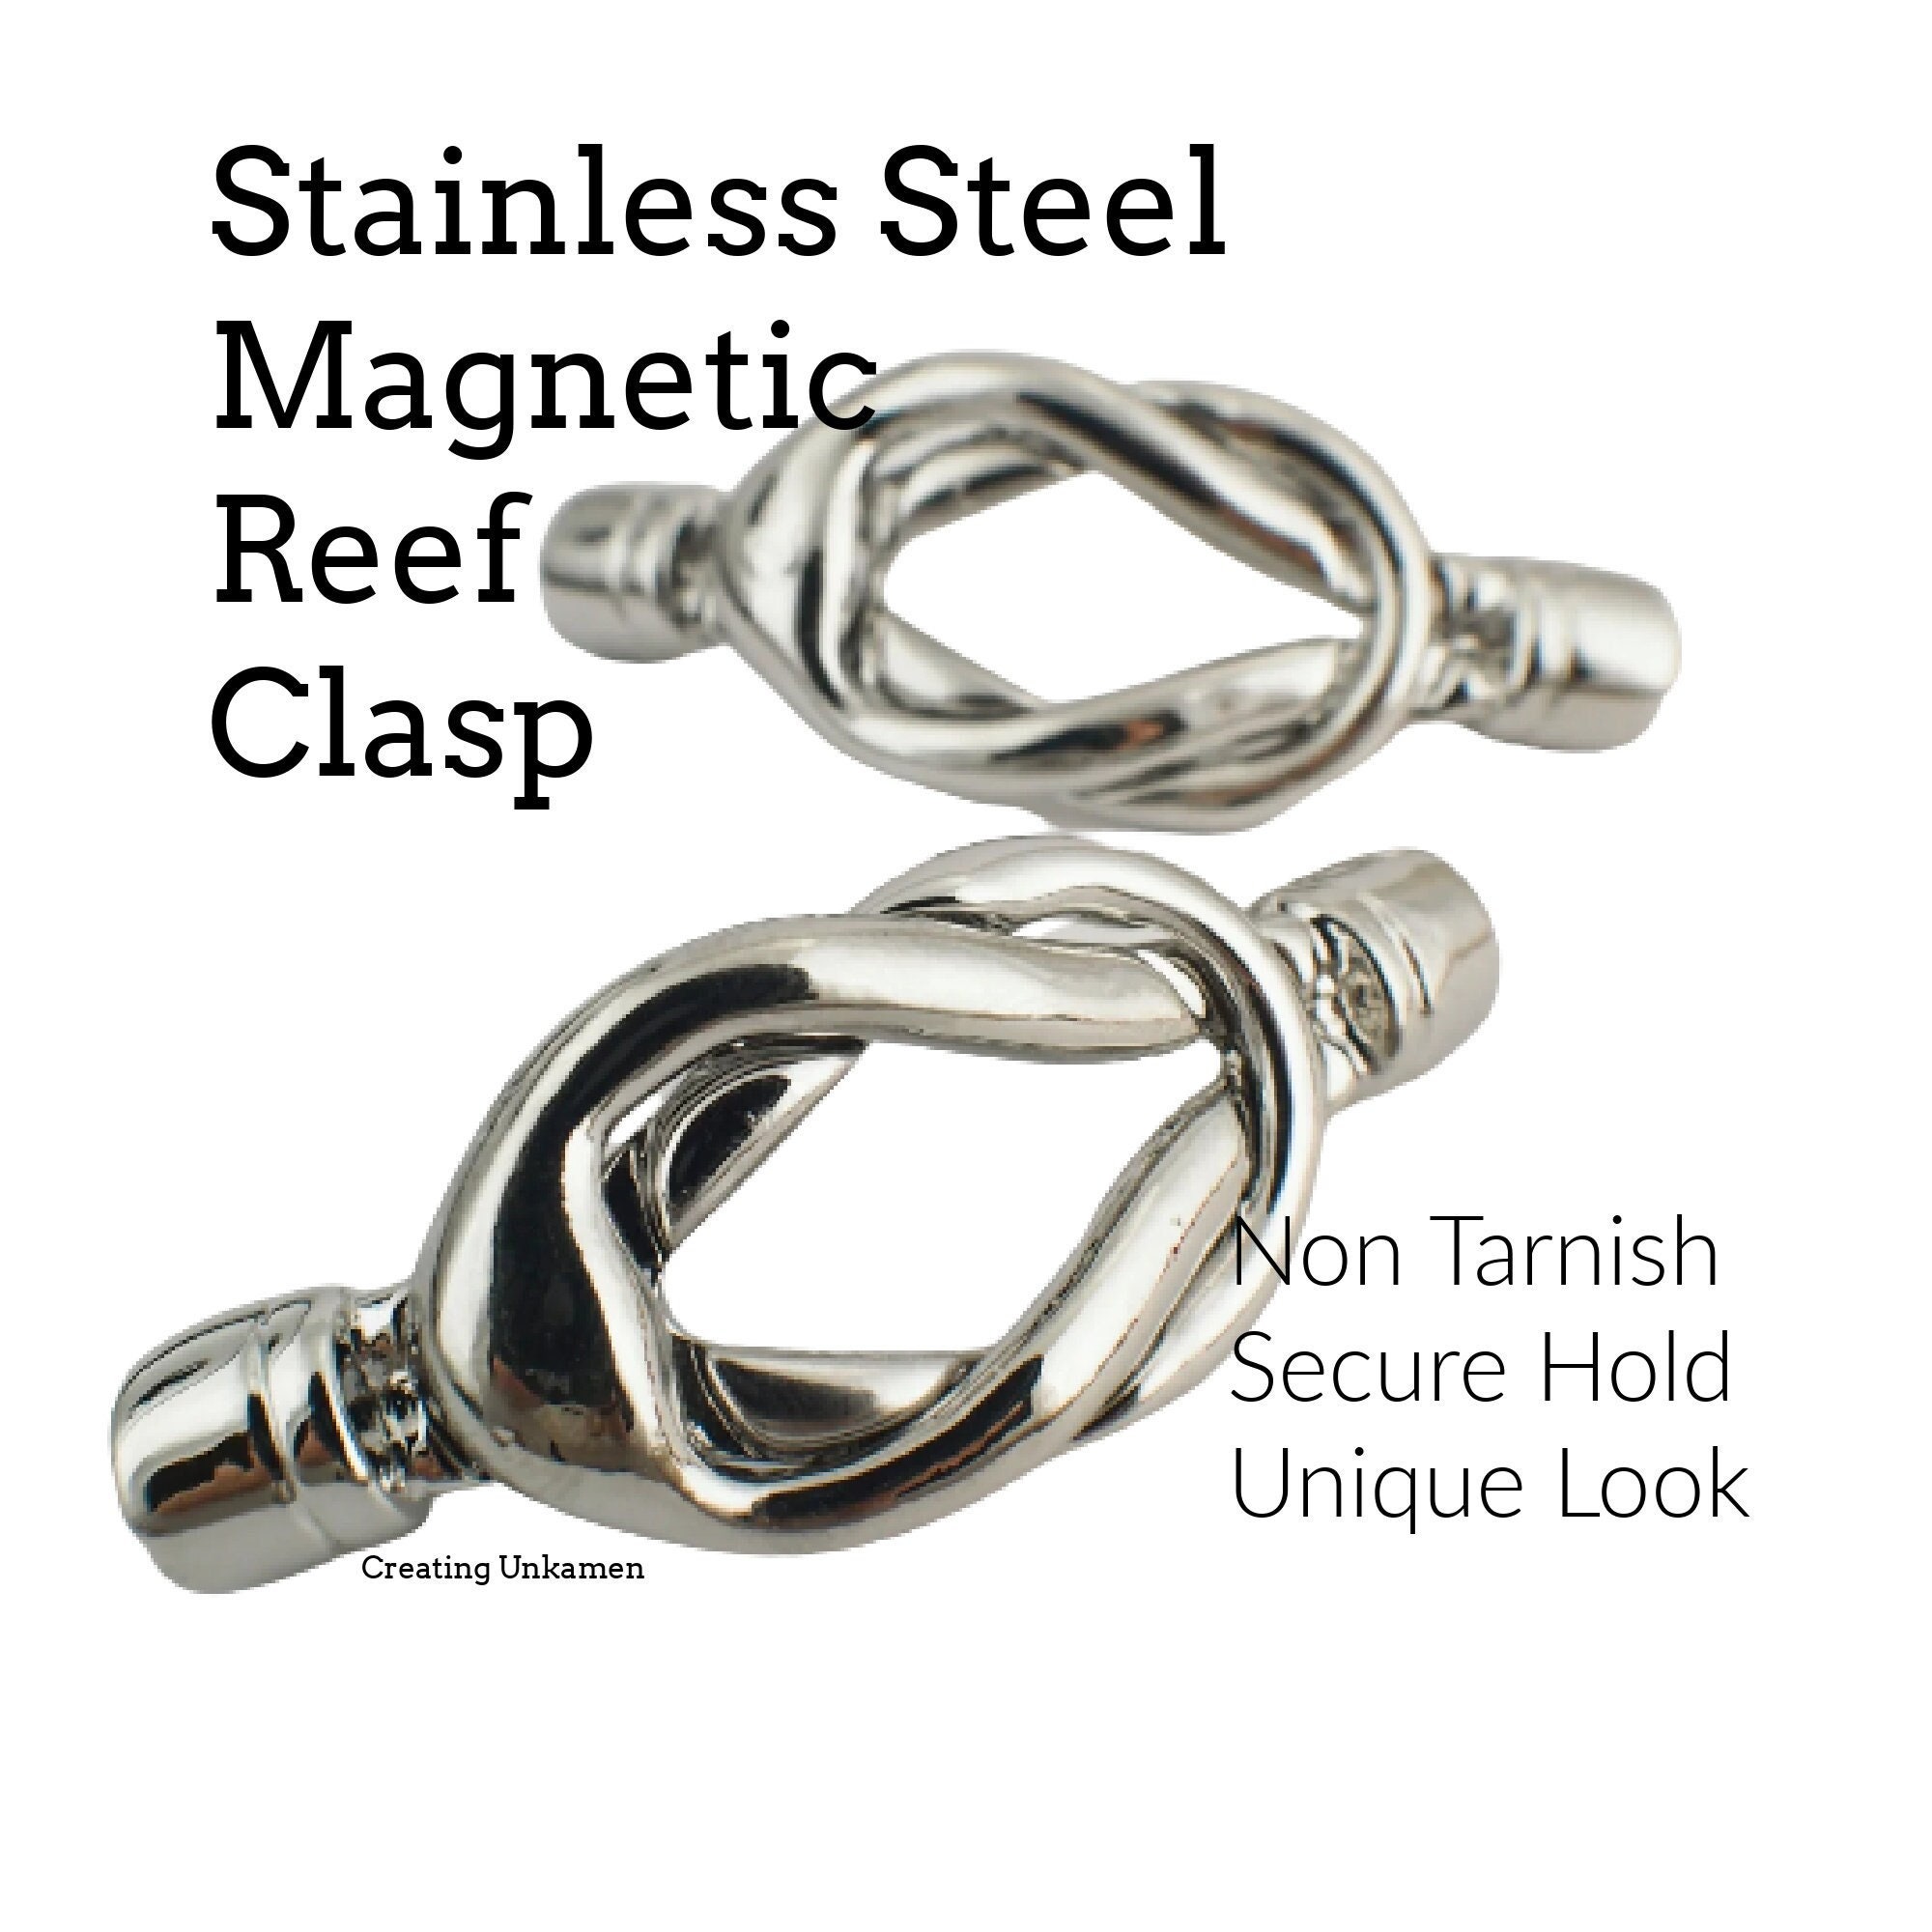 1 Magnetic Reef Knot Clasp in Stainless Steel 100% Guarantee 